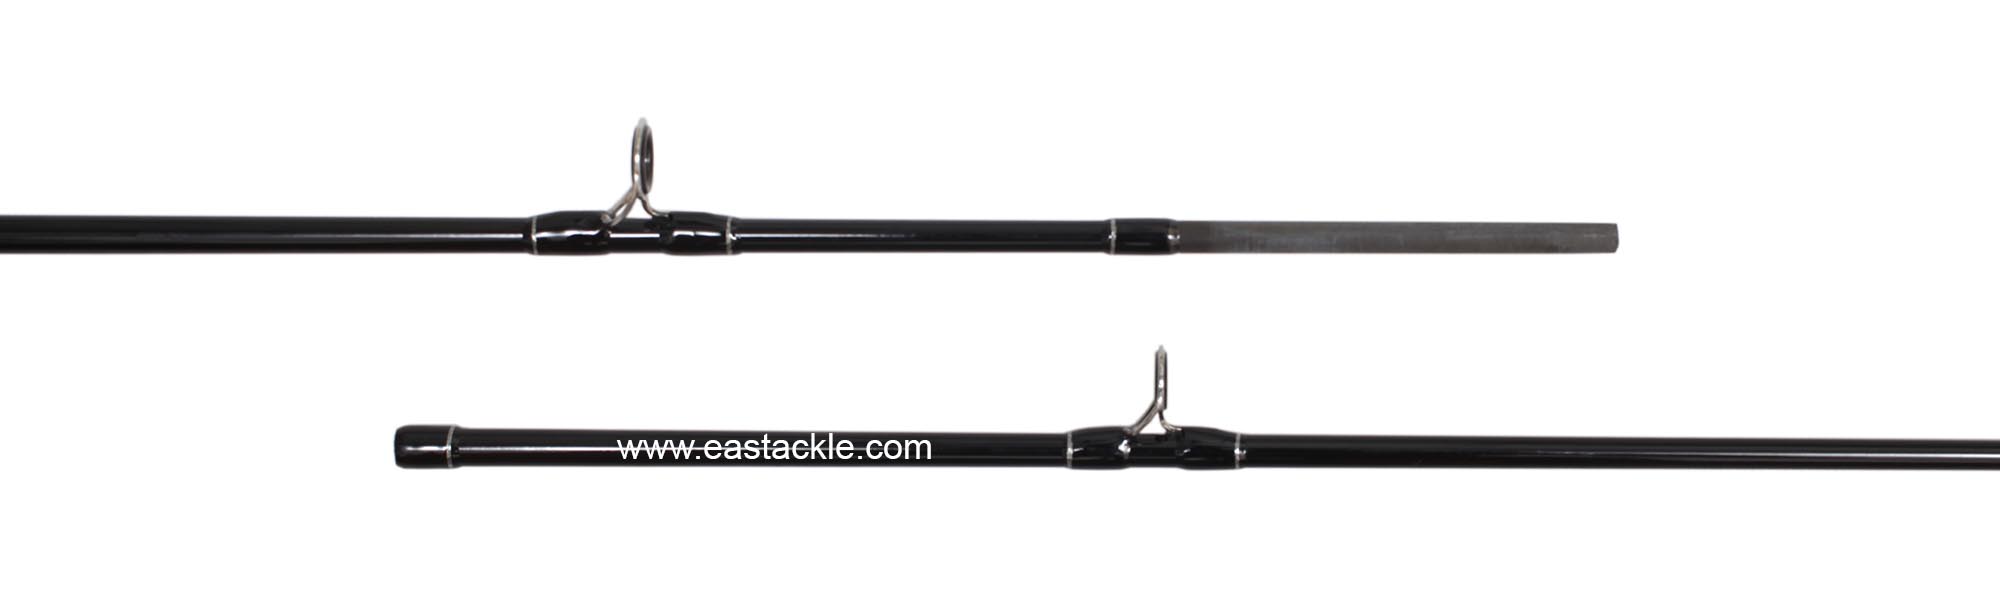 Rapala - Vellamo - VMC632M - Bait Casting Rod - Joint Section (Side View) | Eastackle